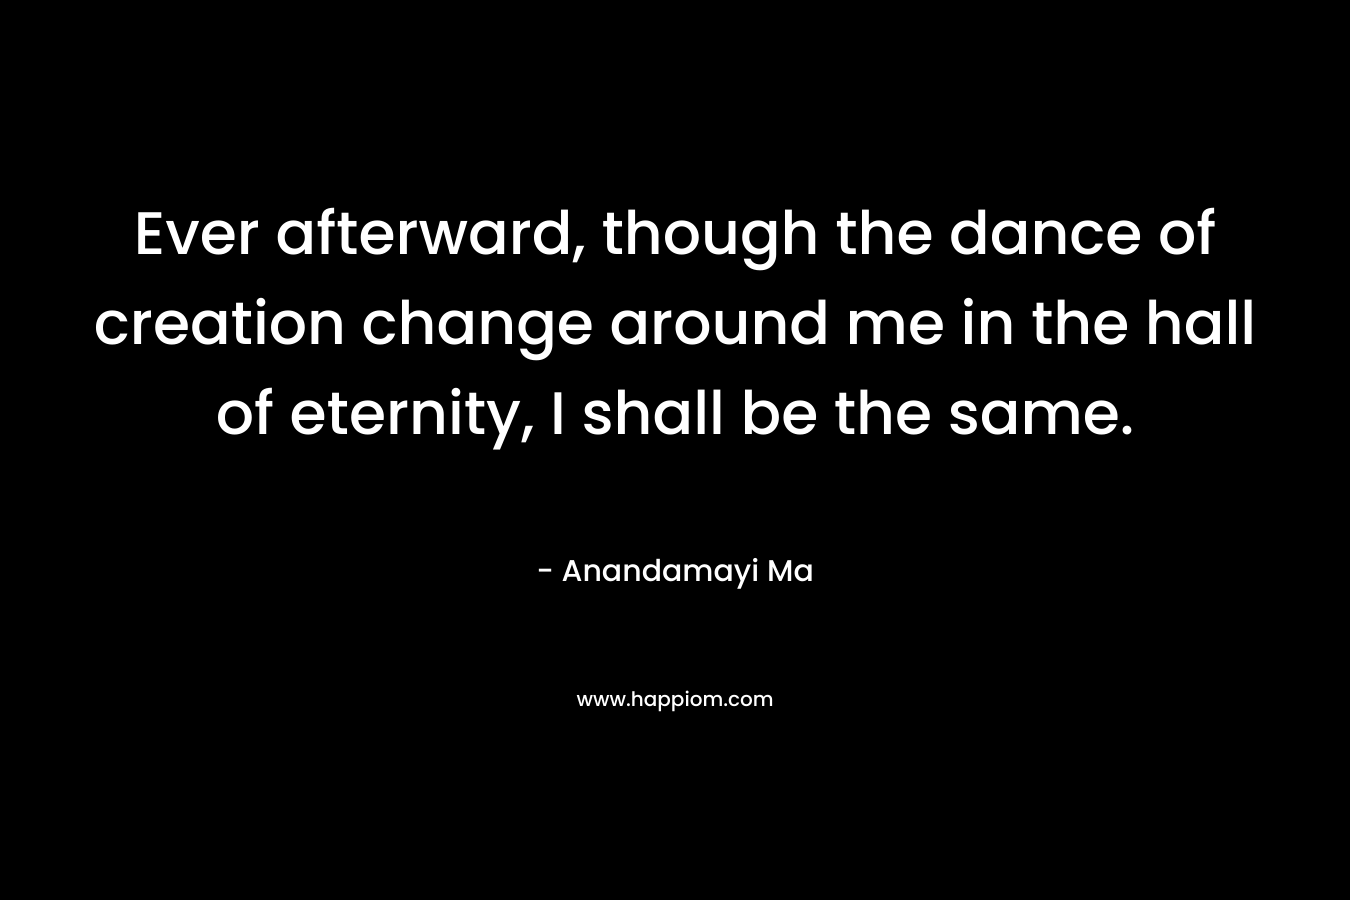 Ever afterward, though the dance of creation change around me in the hall of eternity, I shall be the same.